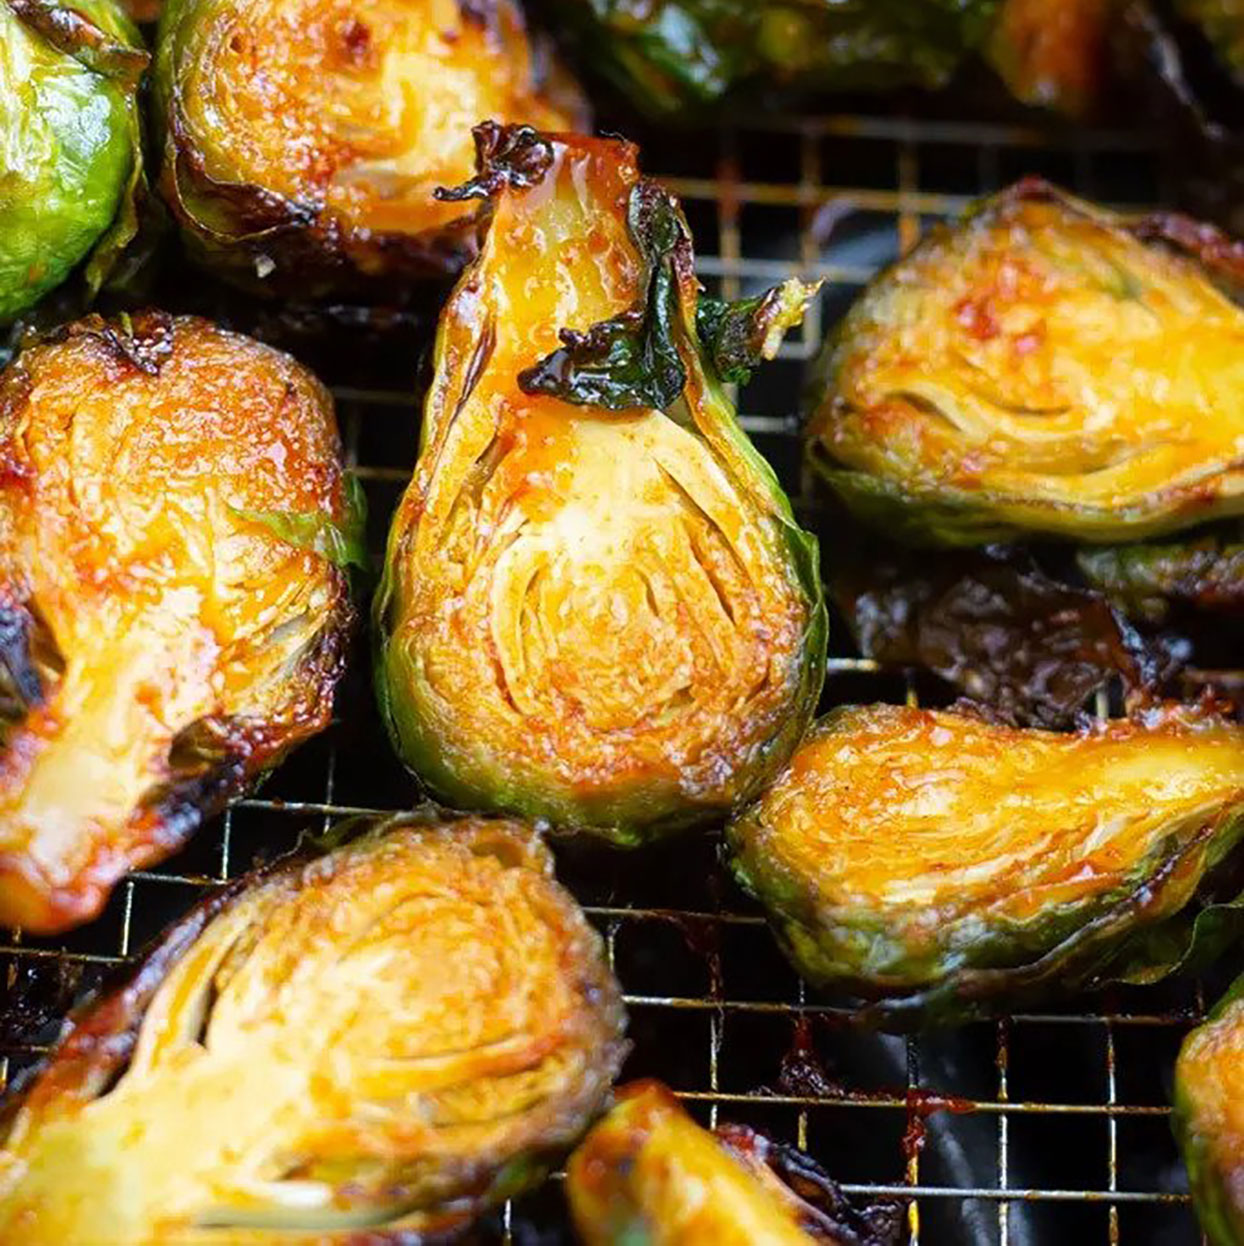 https://derivativedishes.com/wp-content/uploads/2020/12/Air-fryer-brussels-sprouts